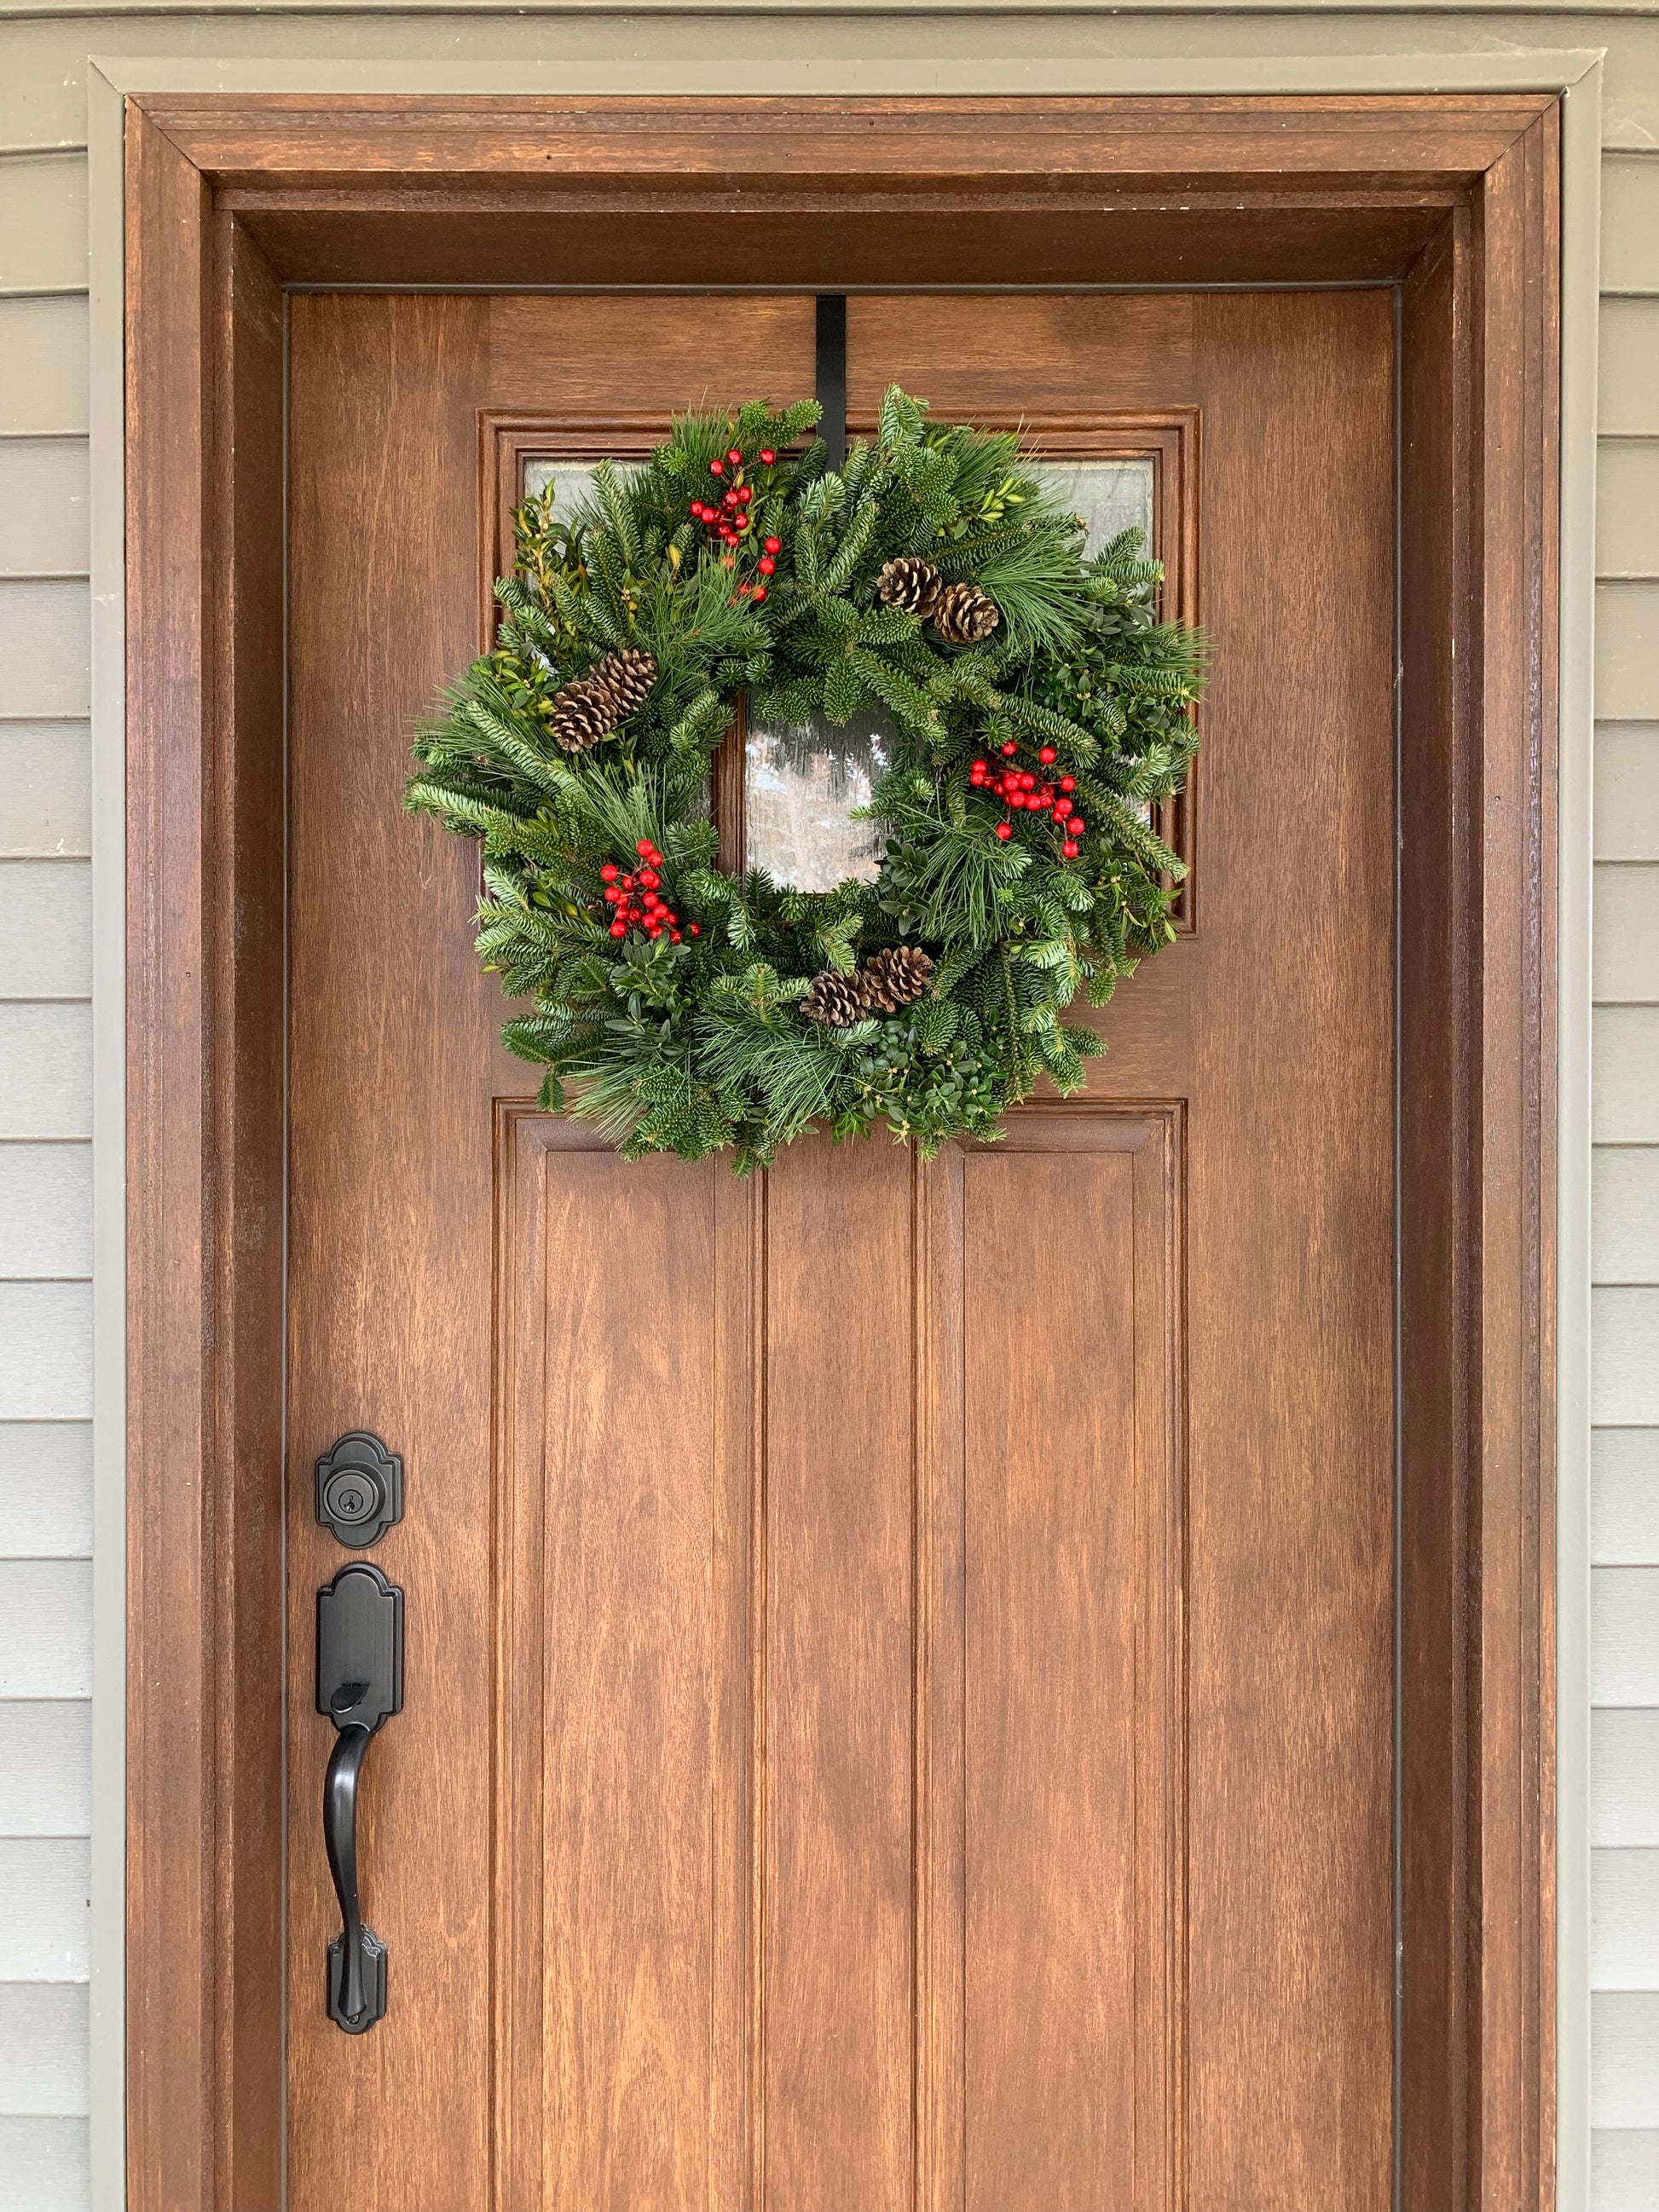 Christmas Wreath with Berries and Pinecones - Hickory View Farms, LLC